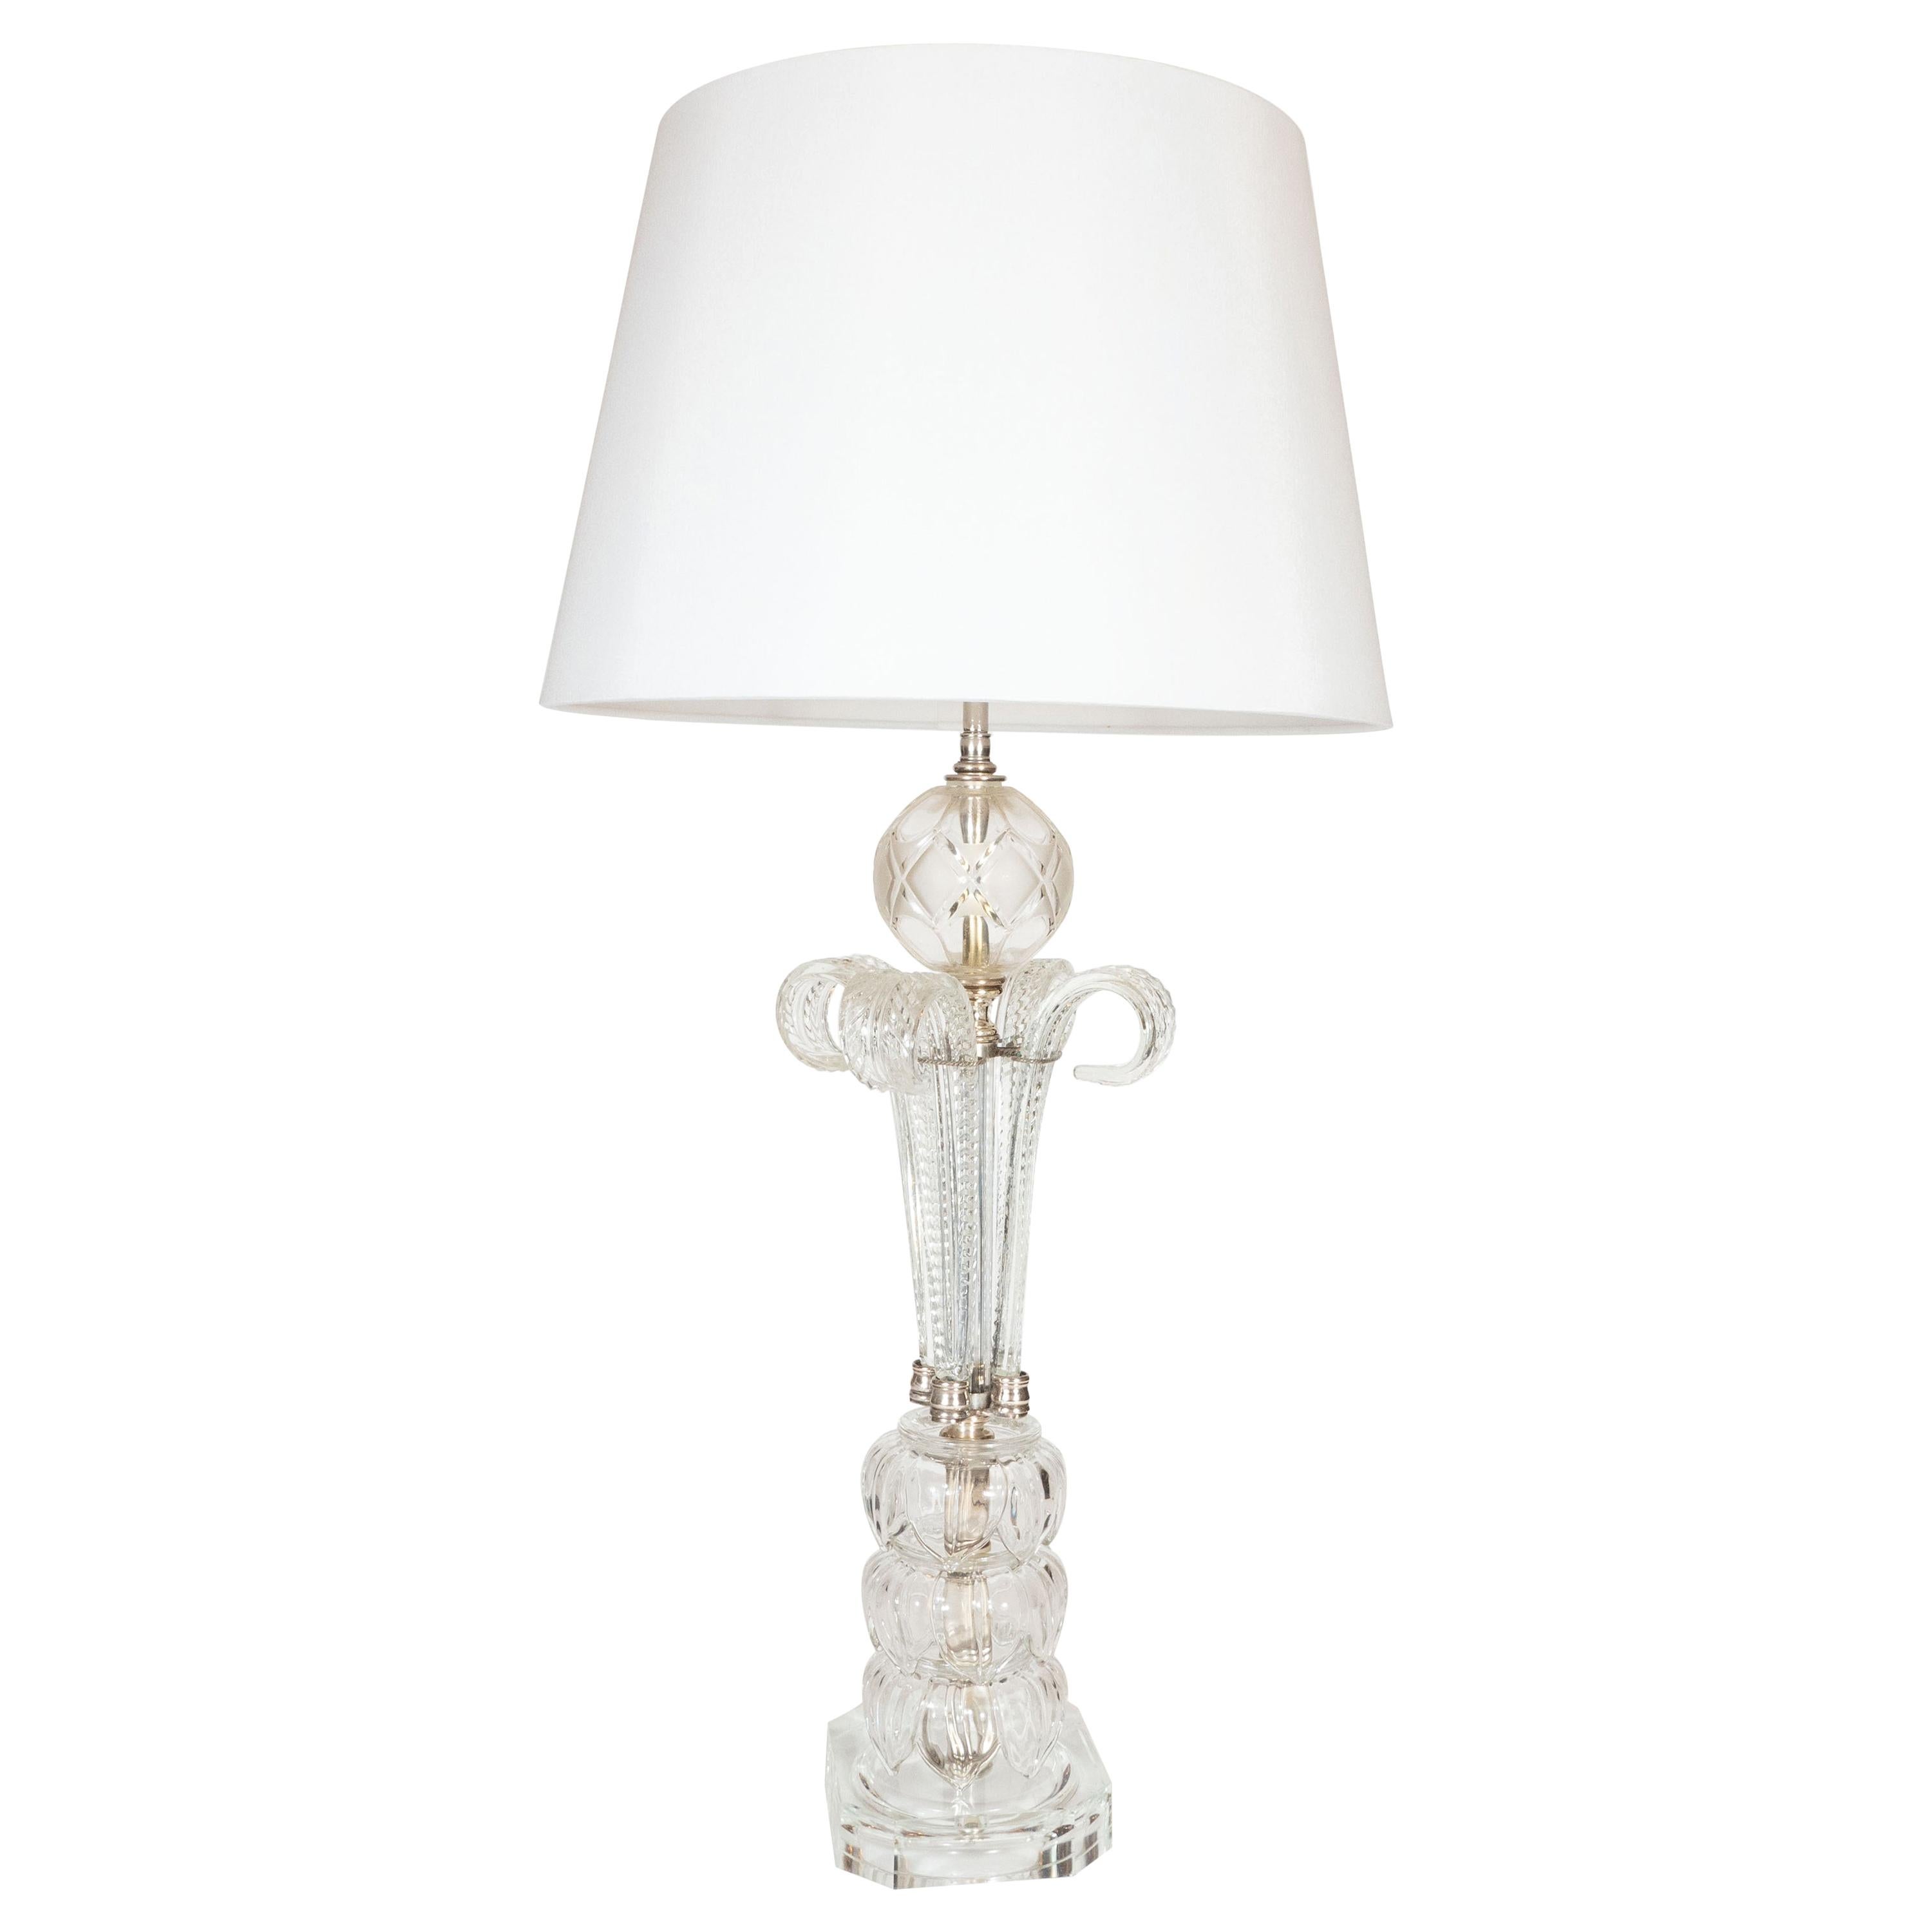 1940s Hollywood Regency Translucent Cut Crystal Table Lamp with Acanthus Details For Sale